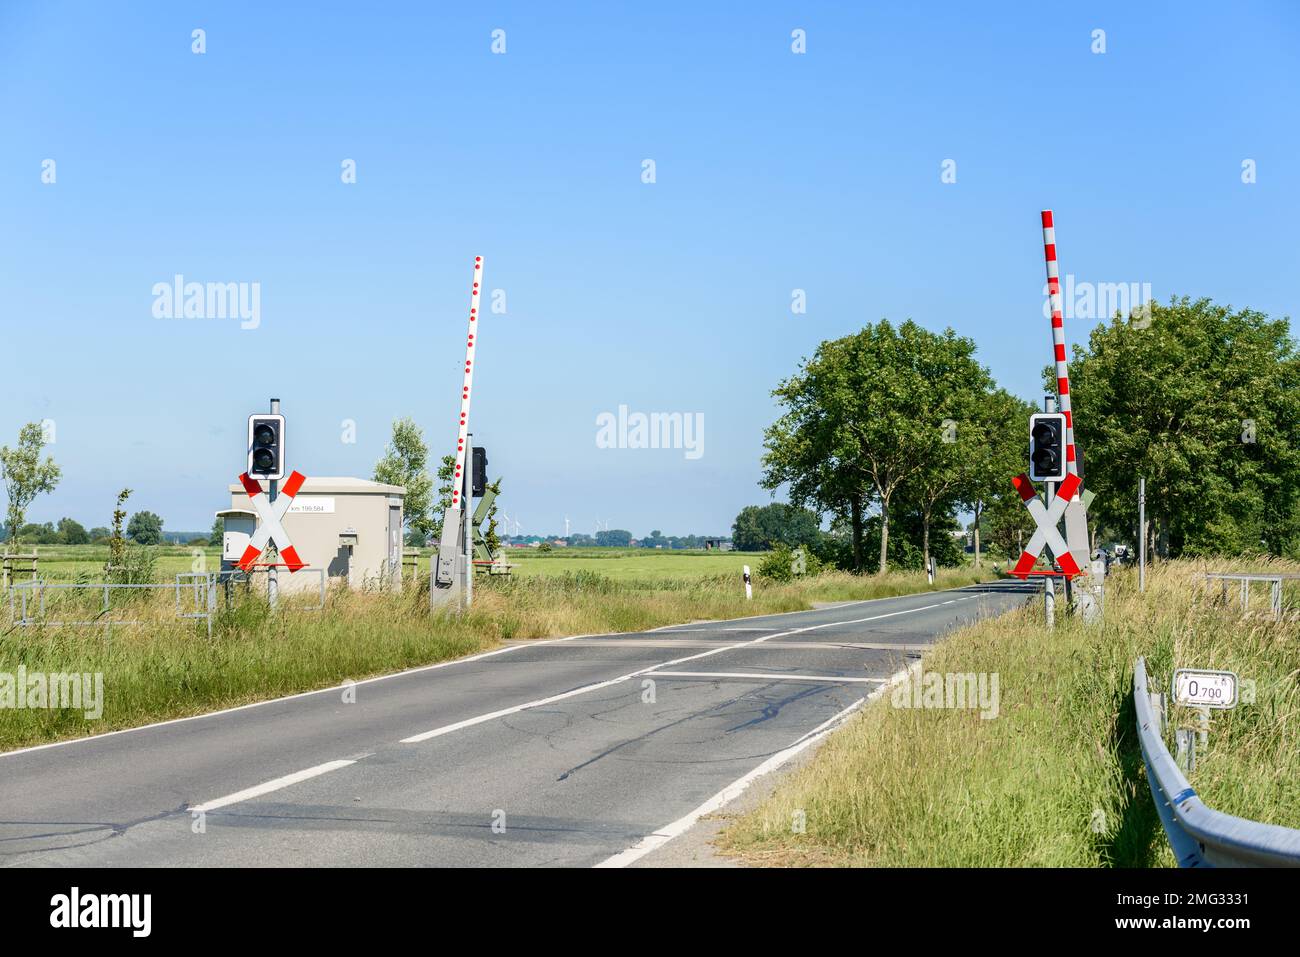 Level crossing with barriers raised for traffic to pass over safely in the countryside of Germany on a clear summer day Stock Photo